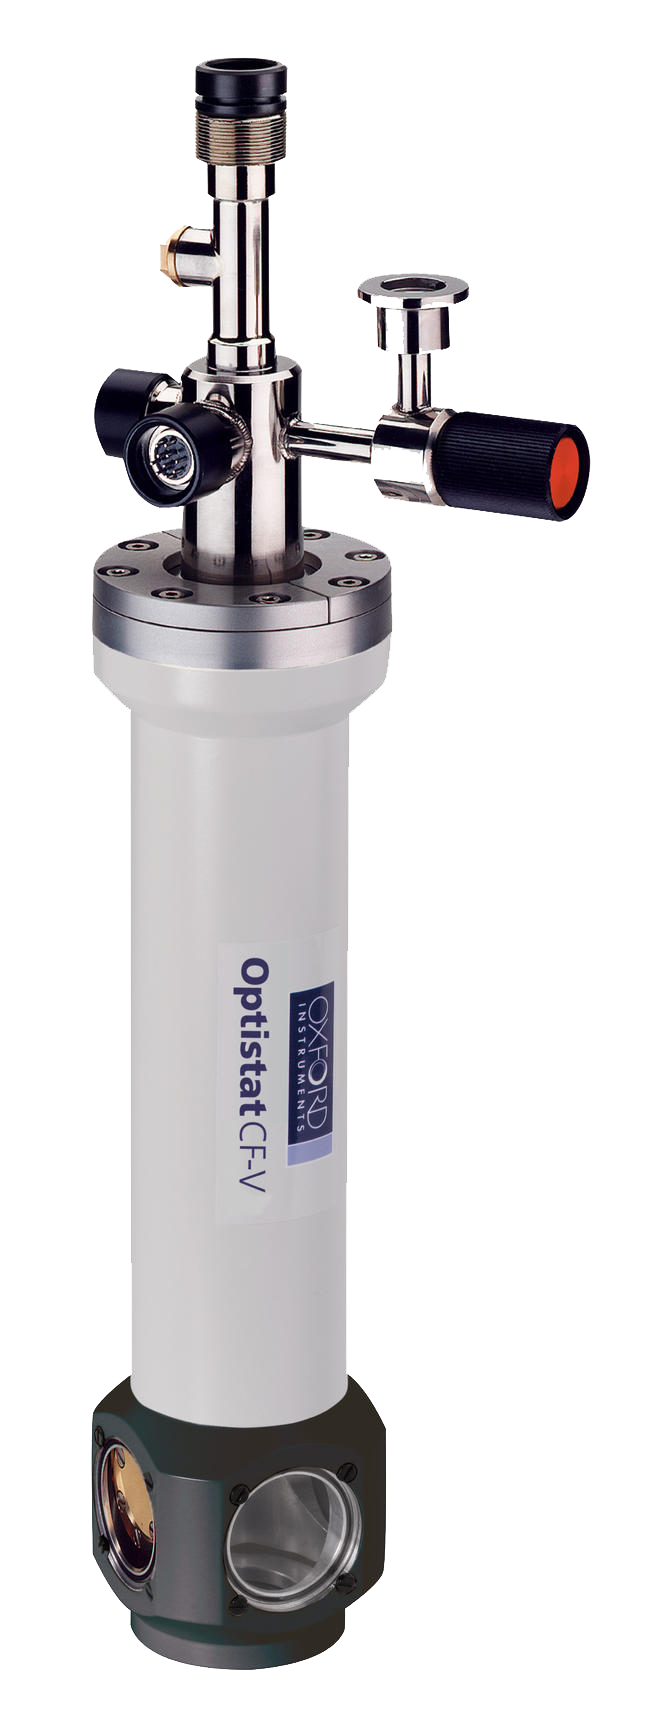 OptistatCF-V - Spectroscopy, cryostats, wet cryostats and sample-in-vaccuum for low temperature research and cryogenics